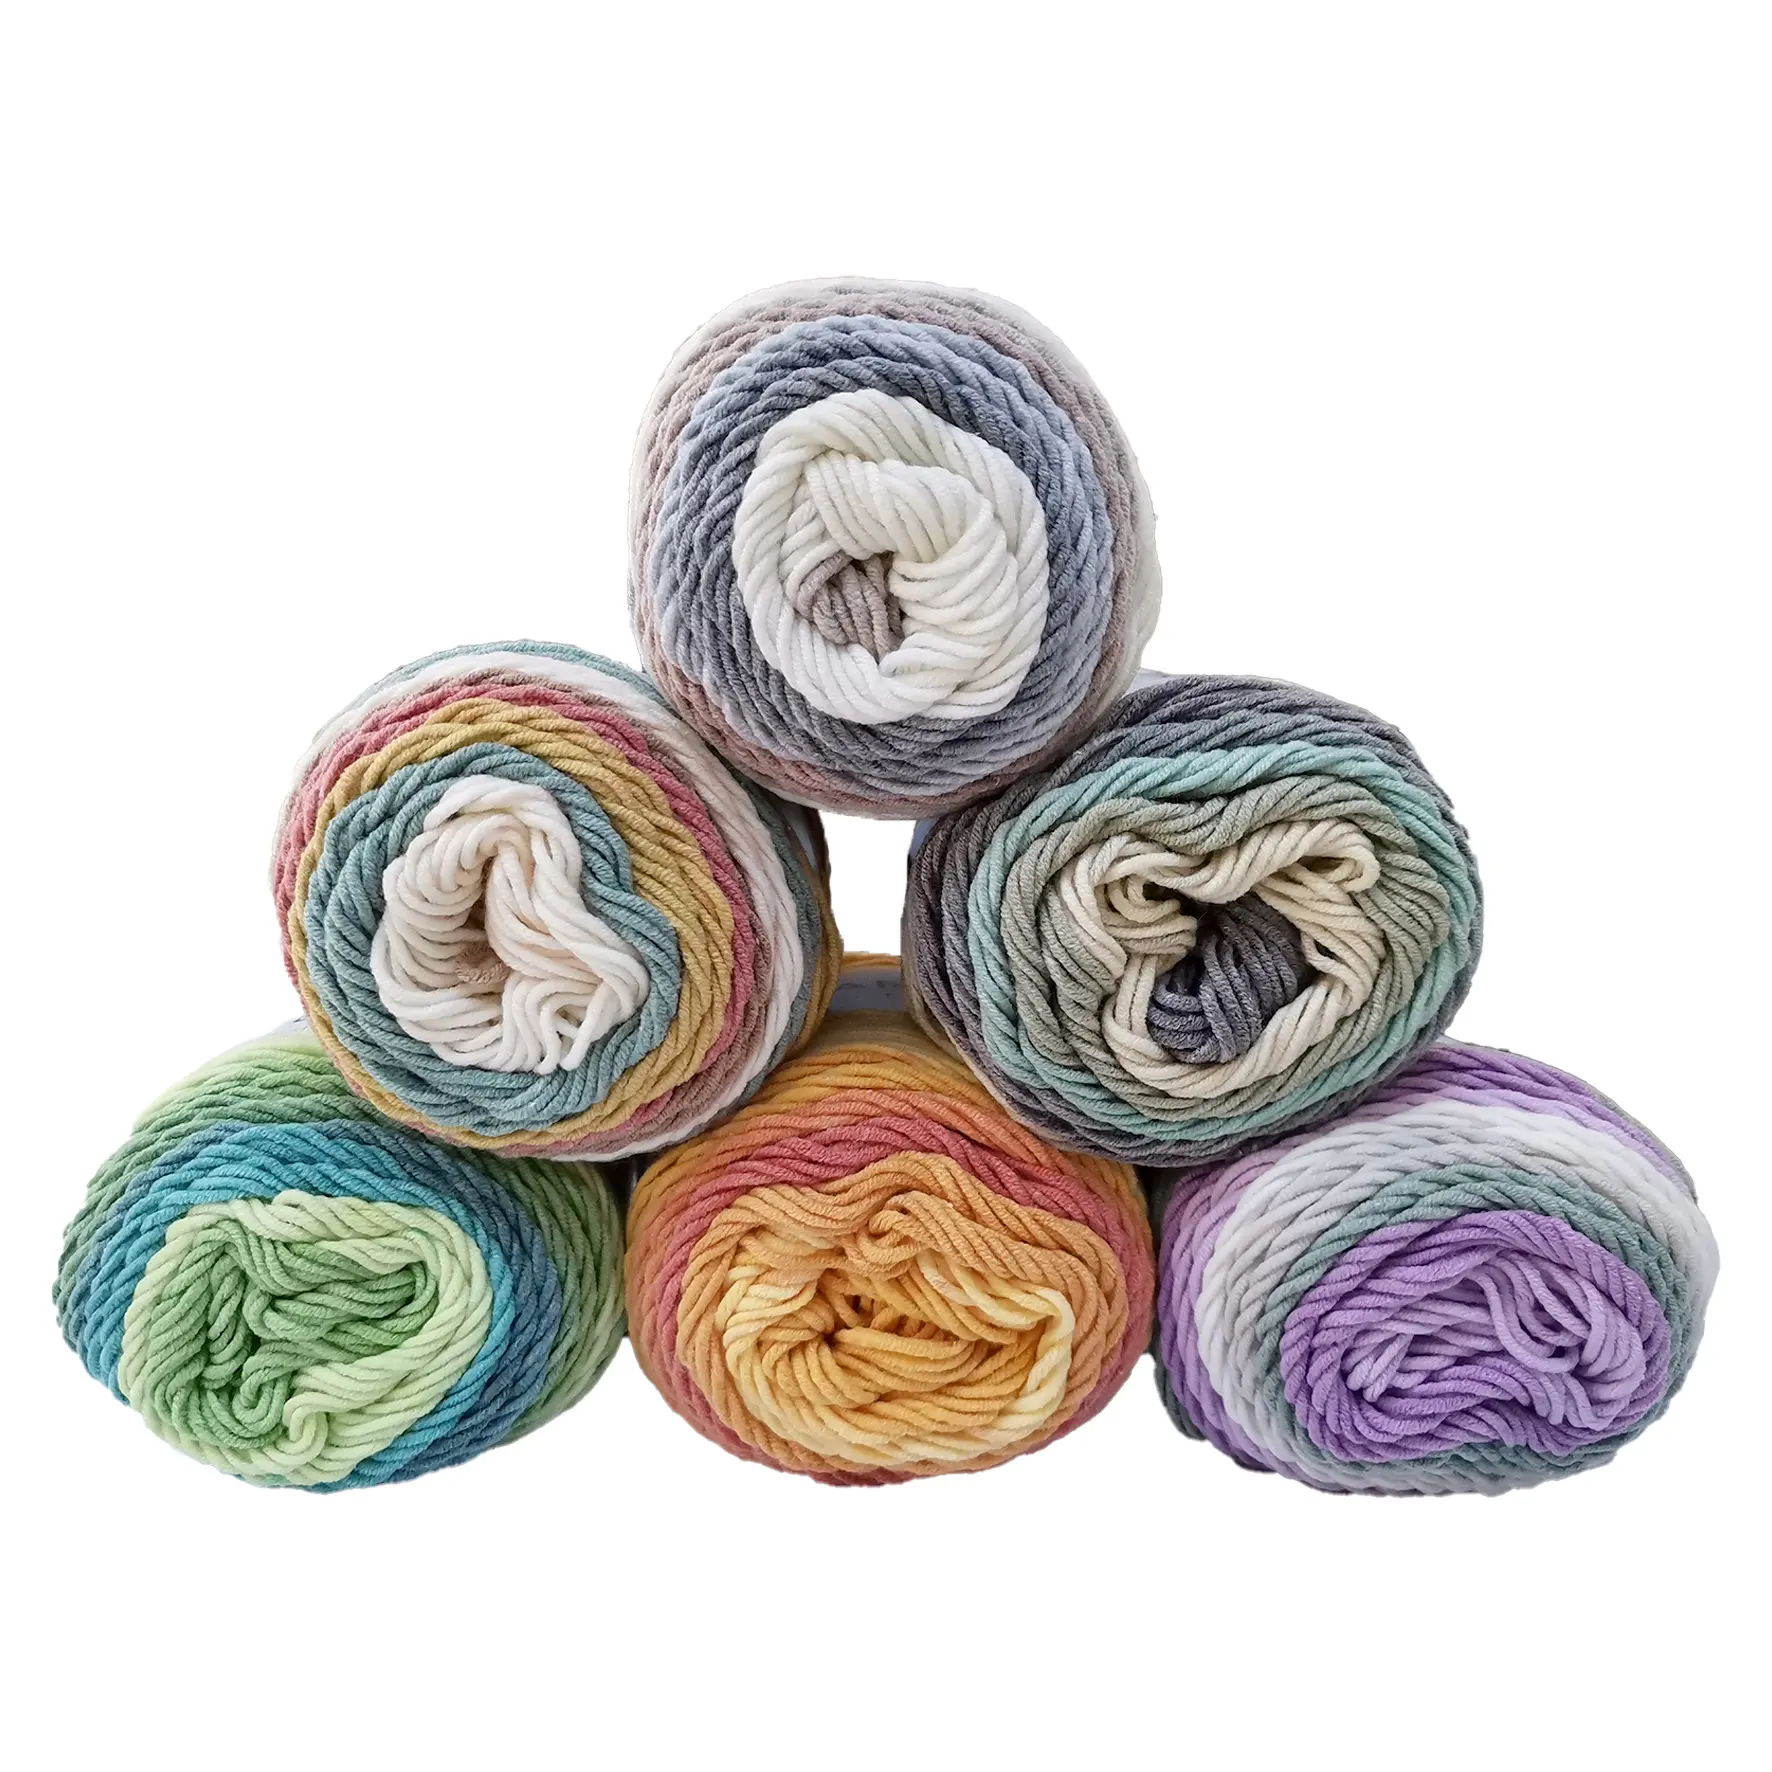 Charmkey new style cotton /acrylic blend yarn for weaving and knitting